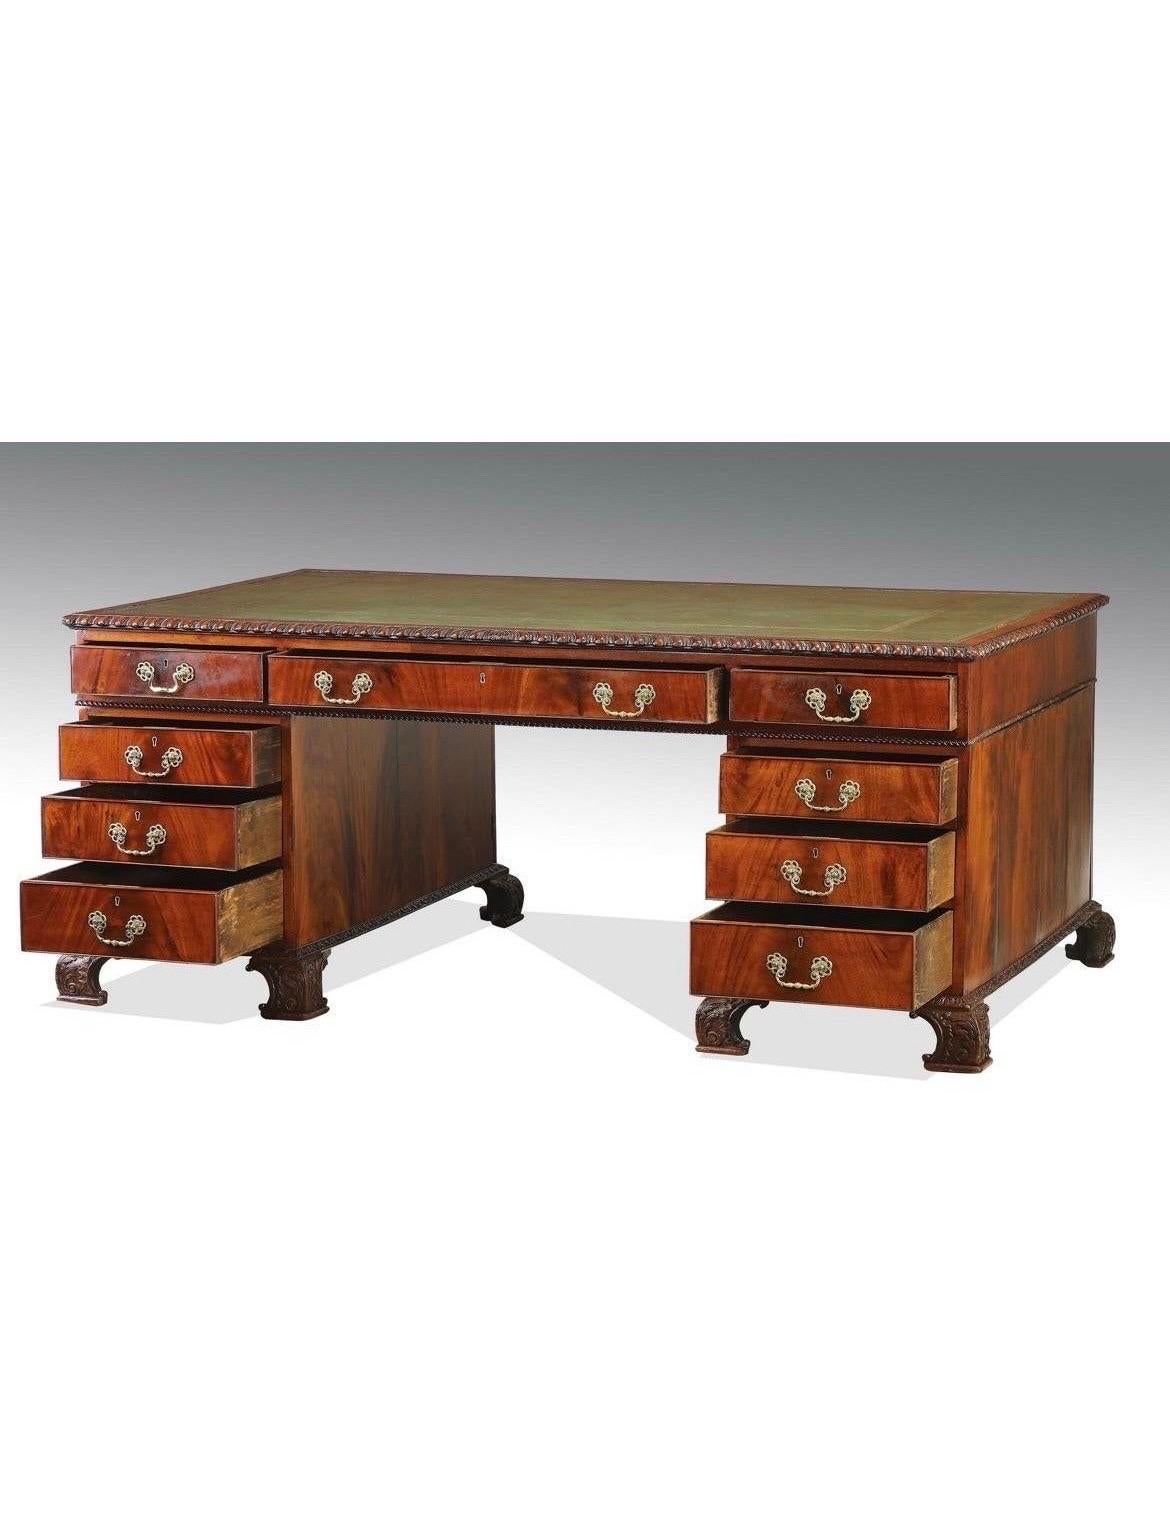 English, 19th century.

19th century English partners' desk, the top with a gadrooned edge and inset with a gilt tooled green leather writing surface, all raised on carved curving feet, in the Chinese chippendale style. Absolutely incredible desk